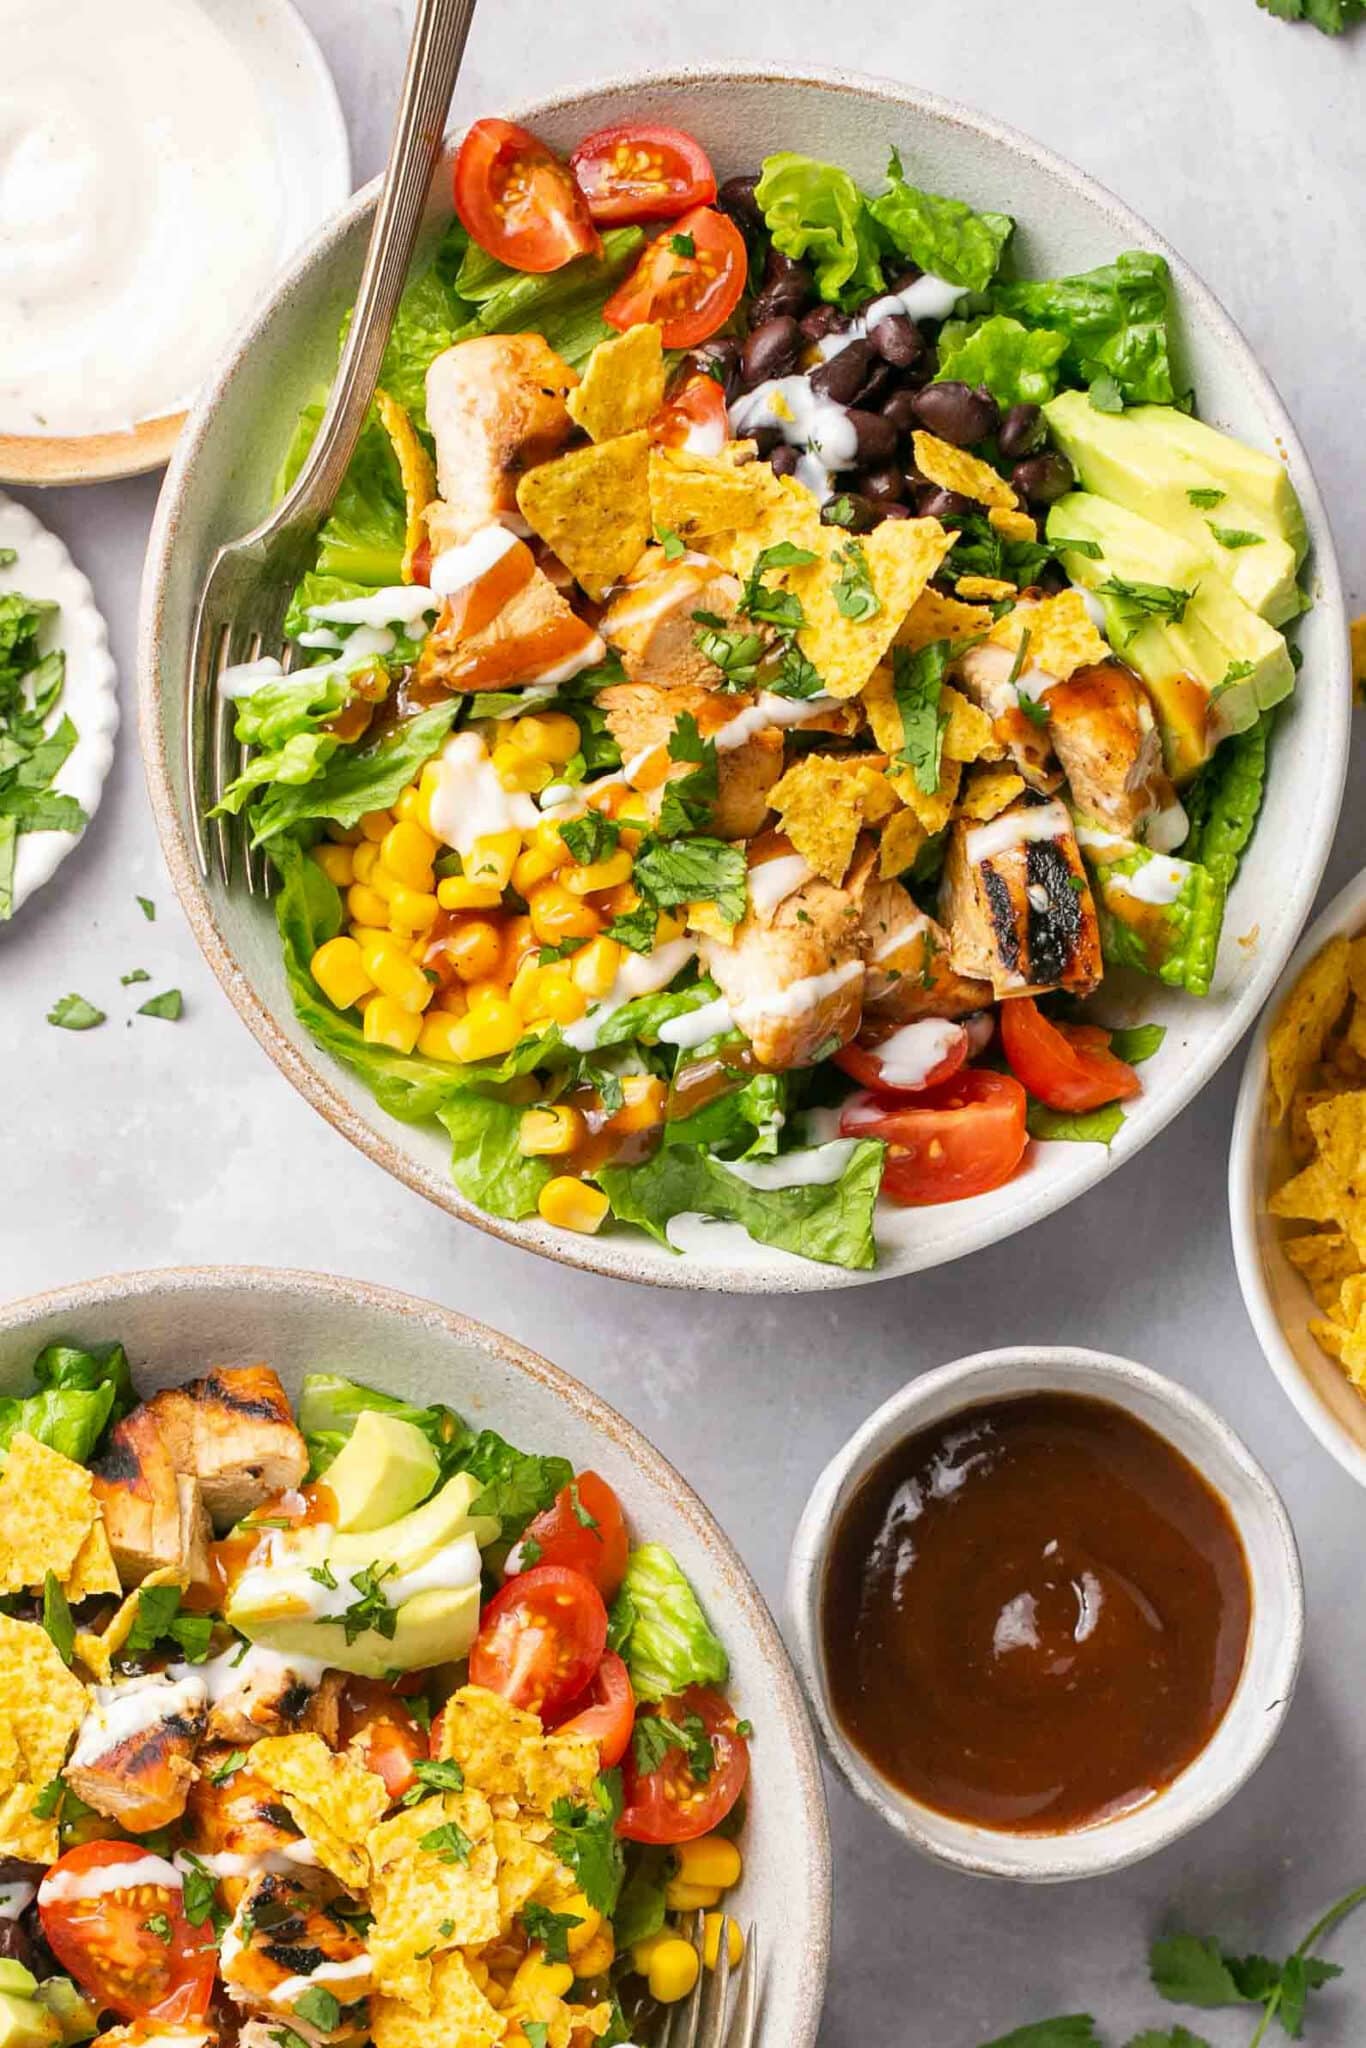 BBQ chicken salad in white bowl near a small bowl of barbecue sauce.